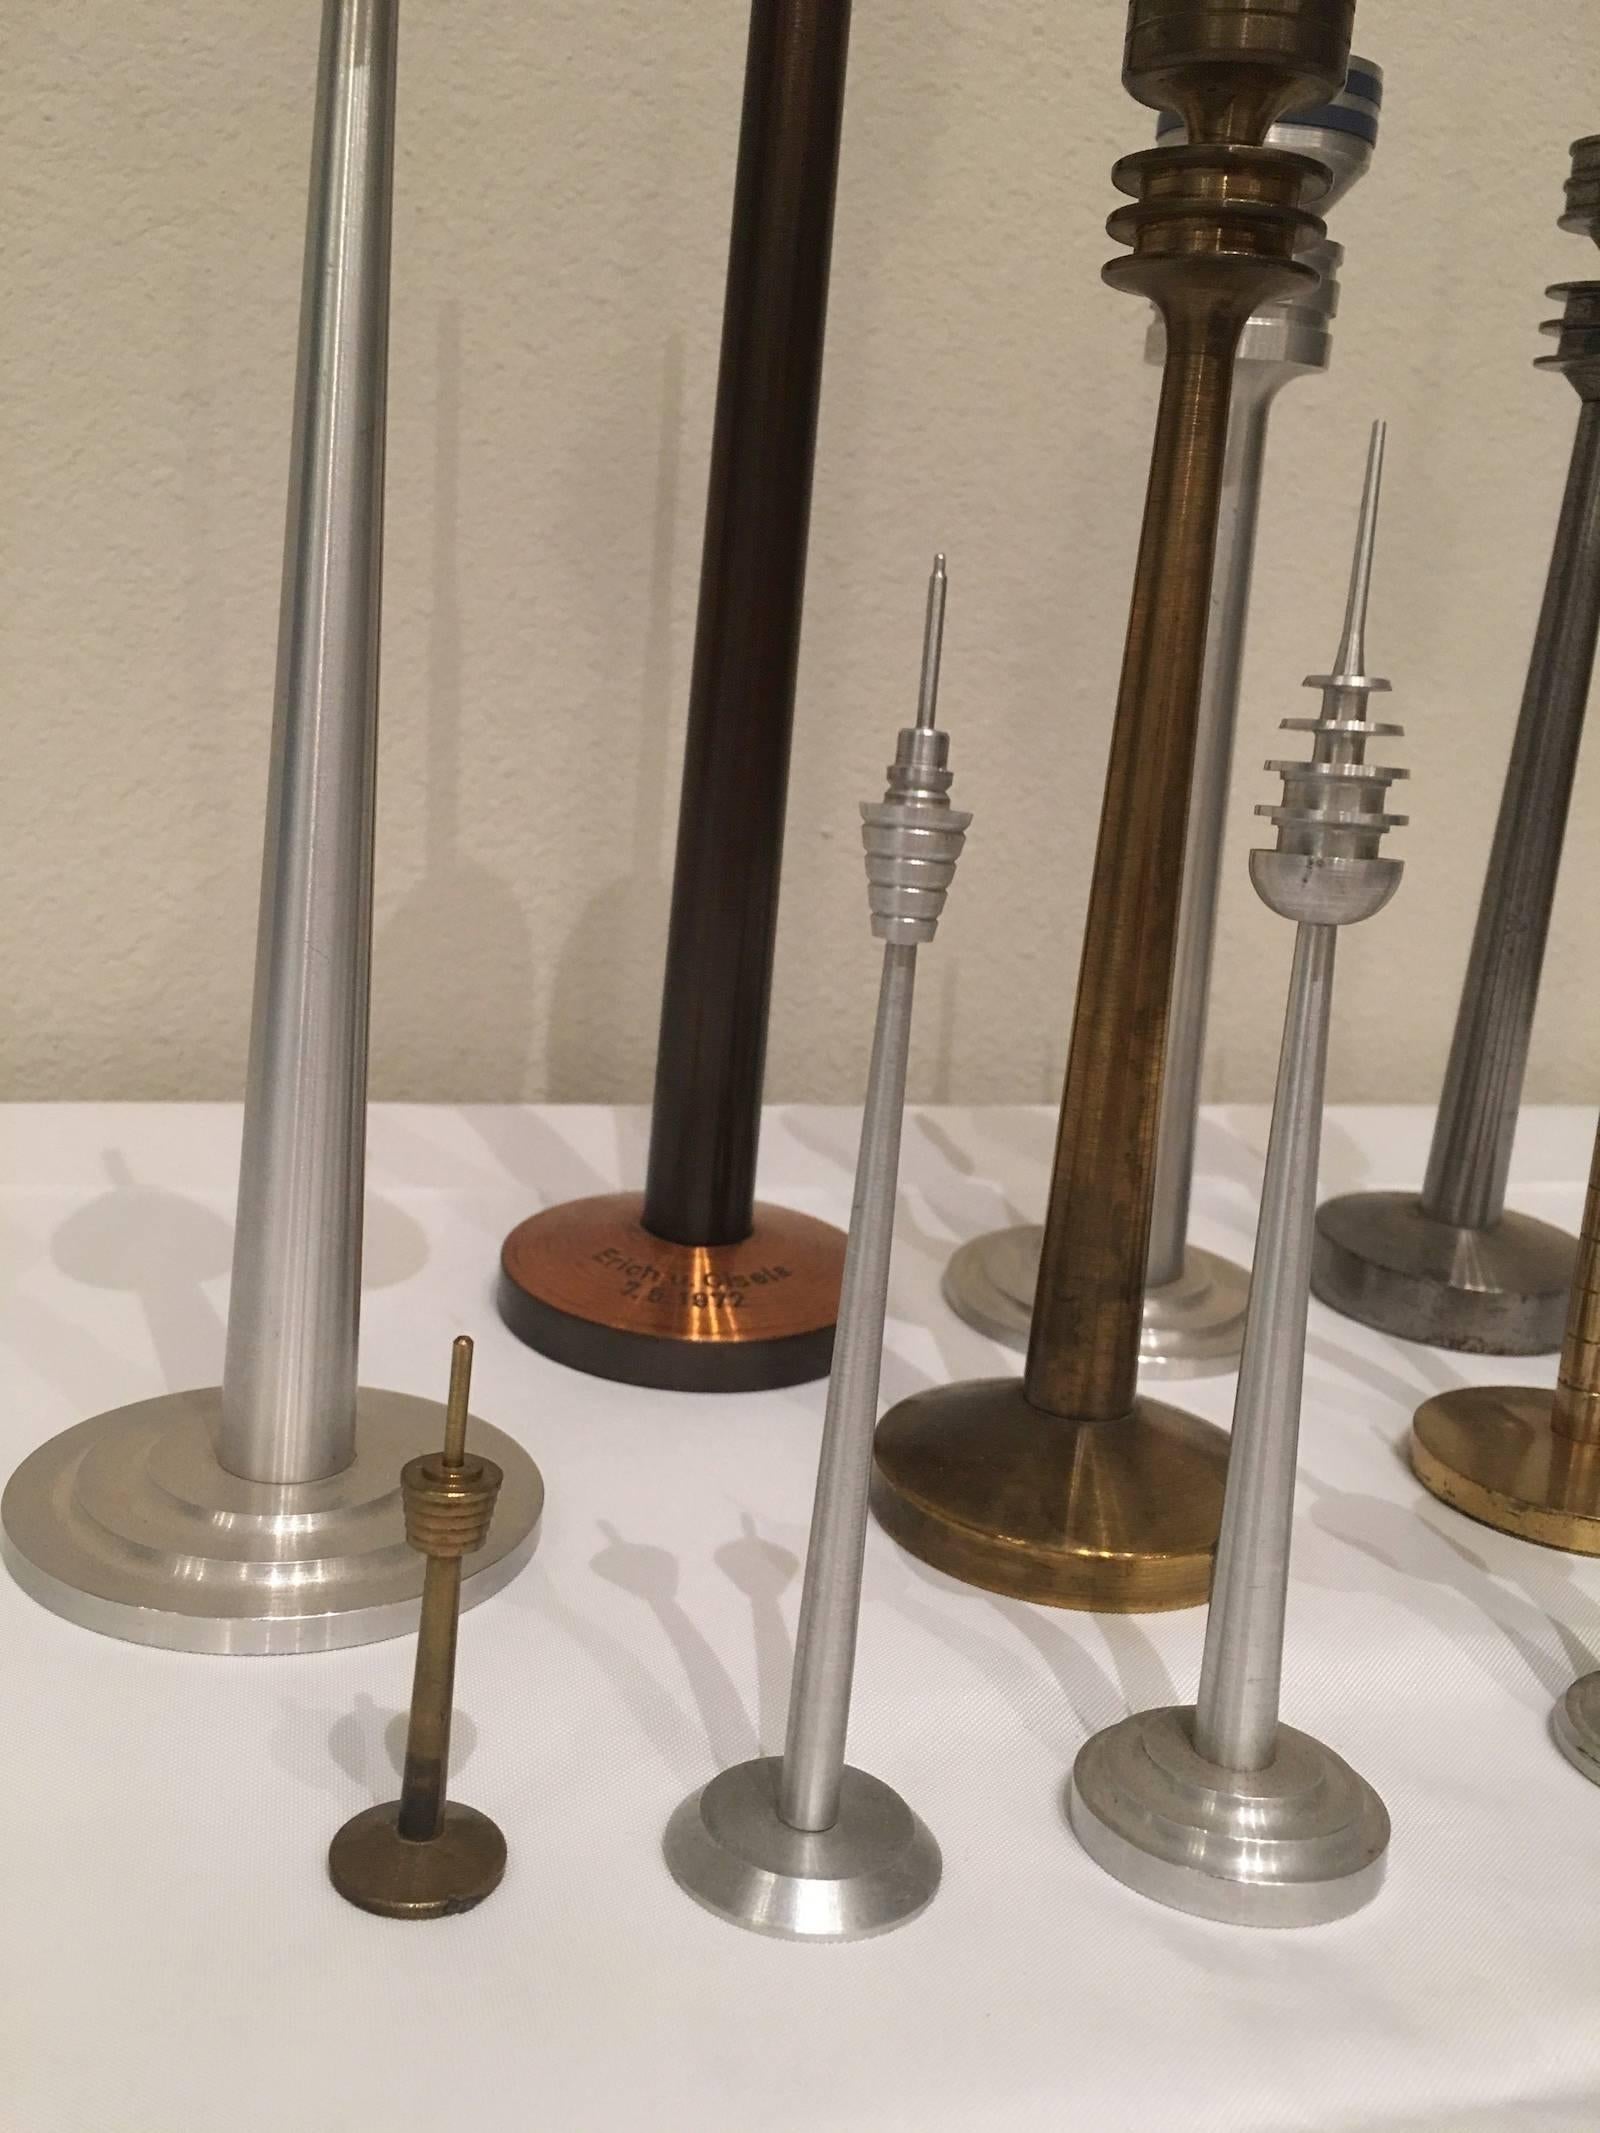 Collection of TV Television Tower Models Design Statues German 1